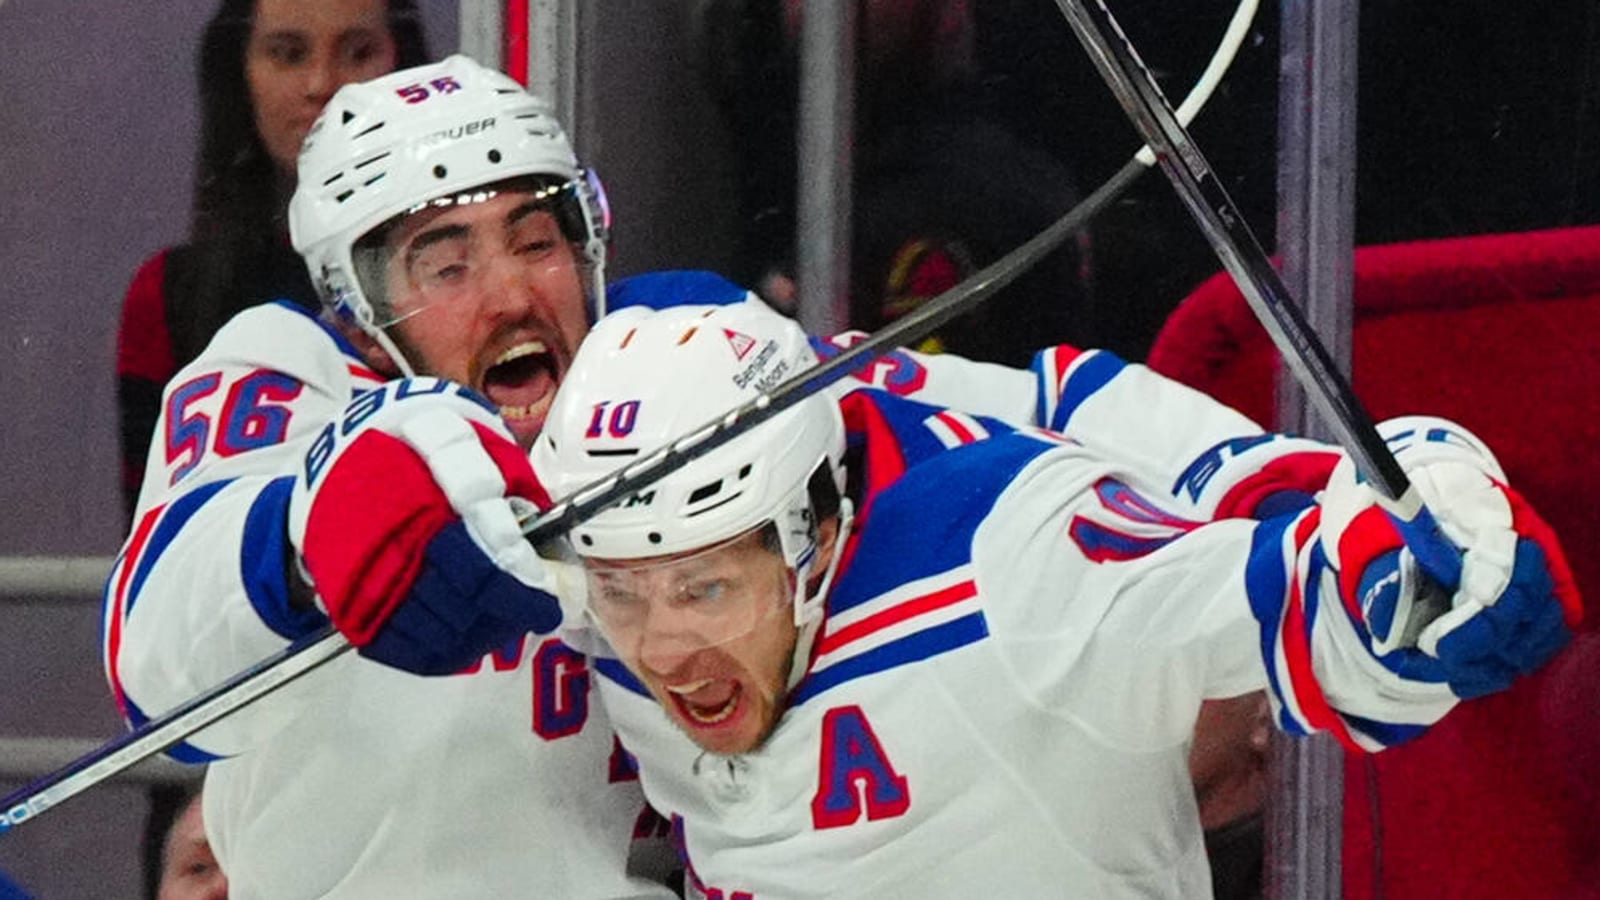 Series highlights: Panarin plays the hero… And the Rangers look unstoppable